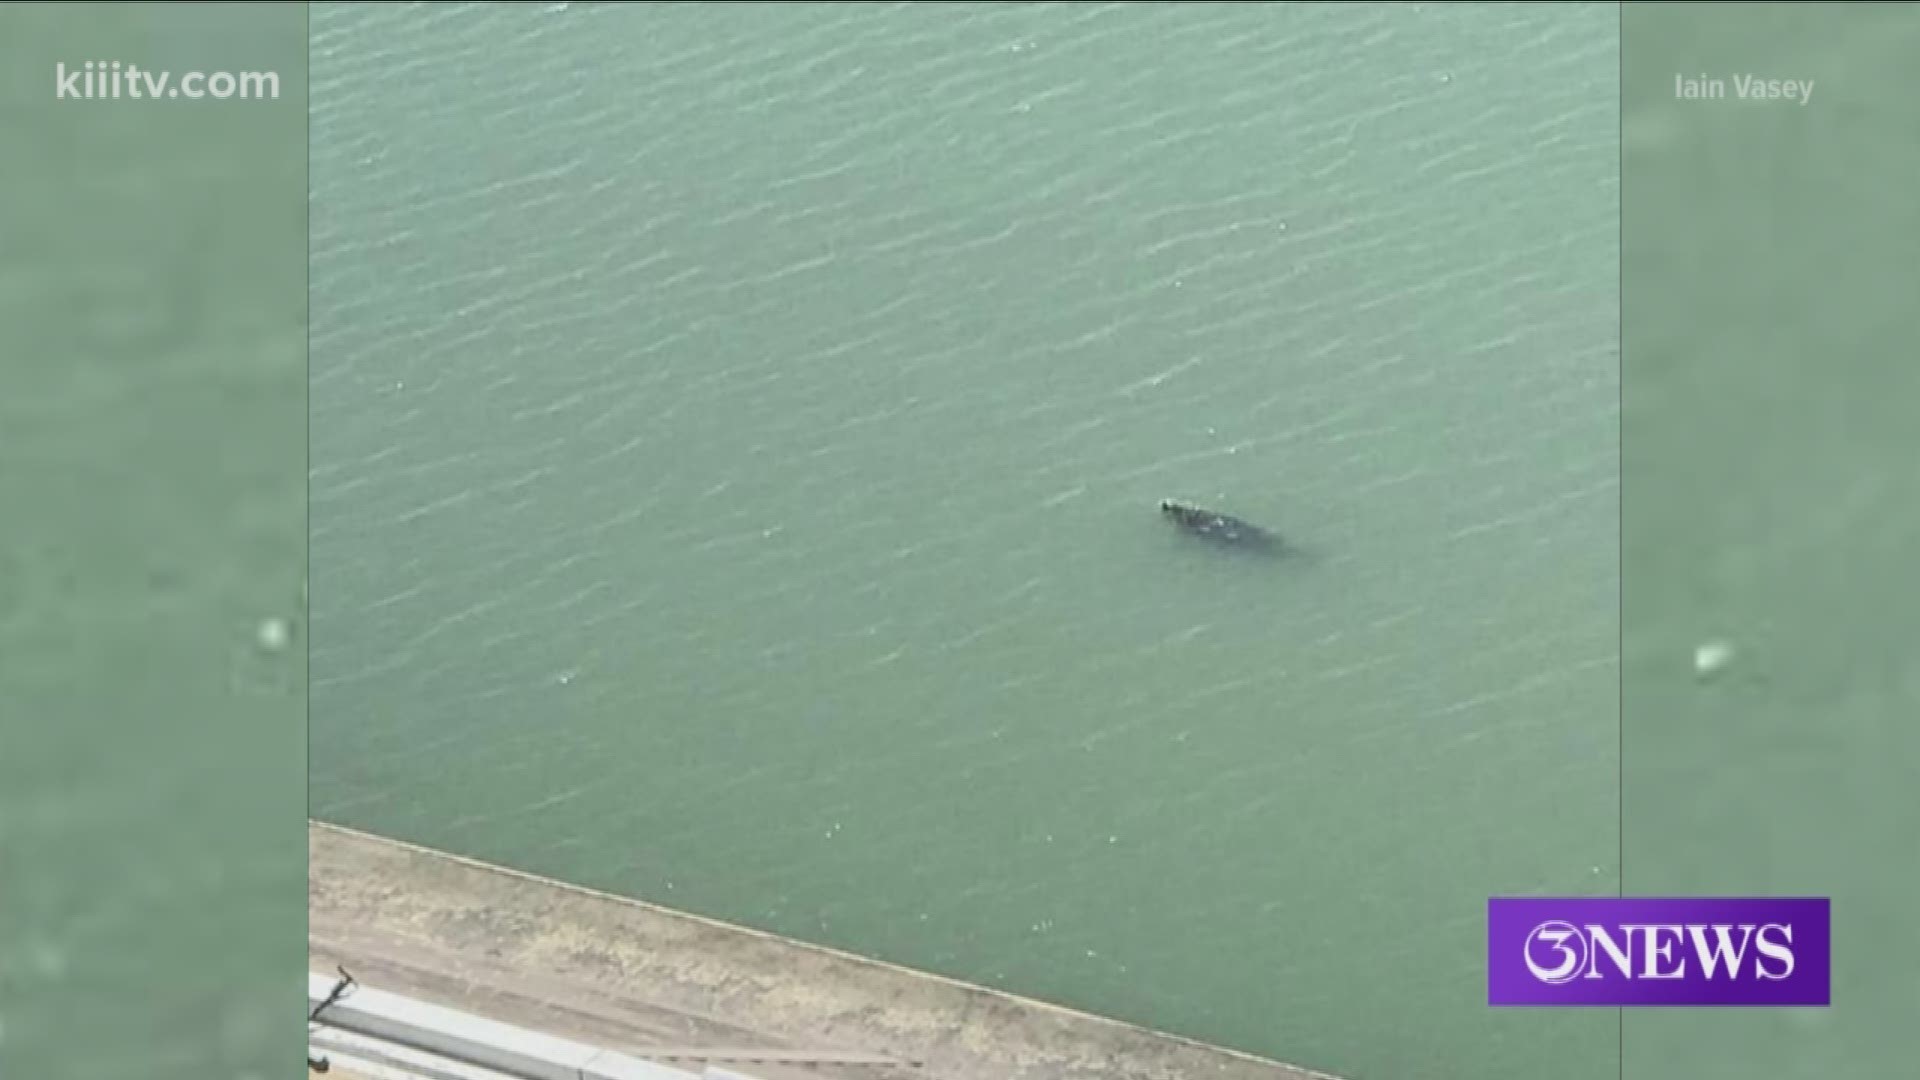 A team of researchers from the Harte Research Institute were notified Thursday morning after a manatee was spotted in the Corpus Christi Marina.